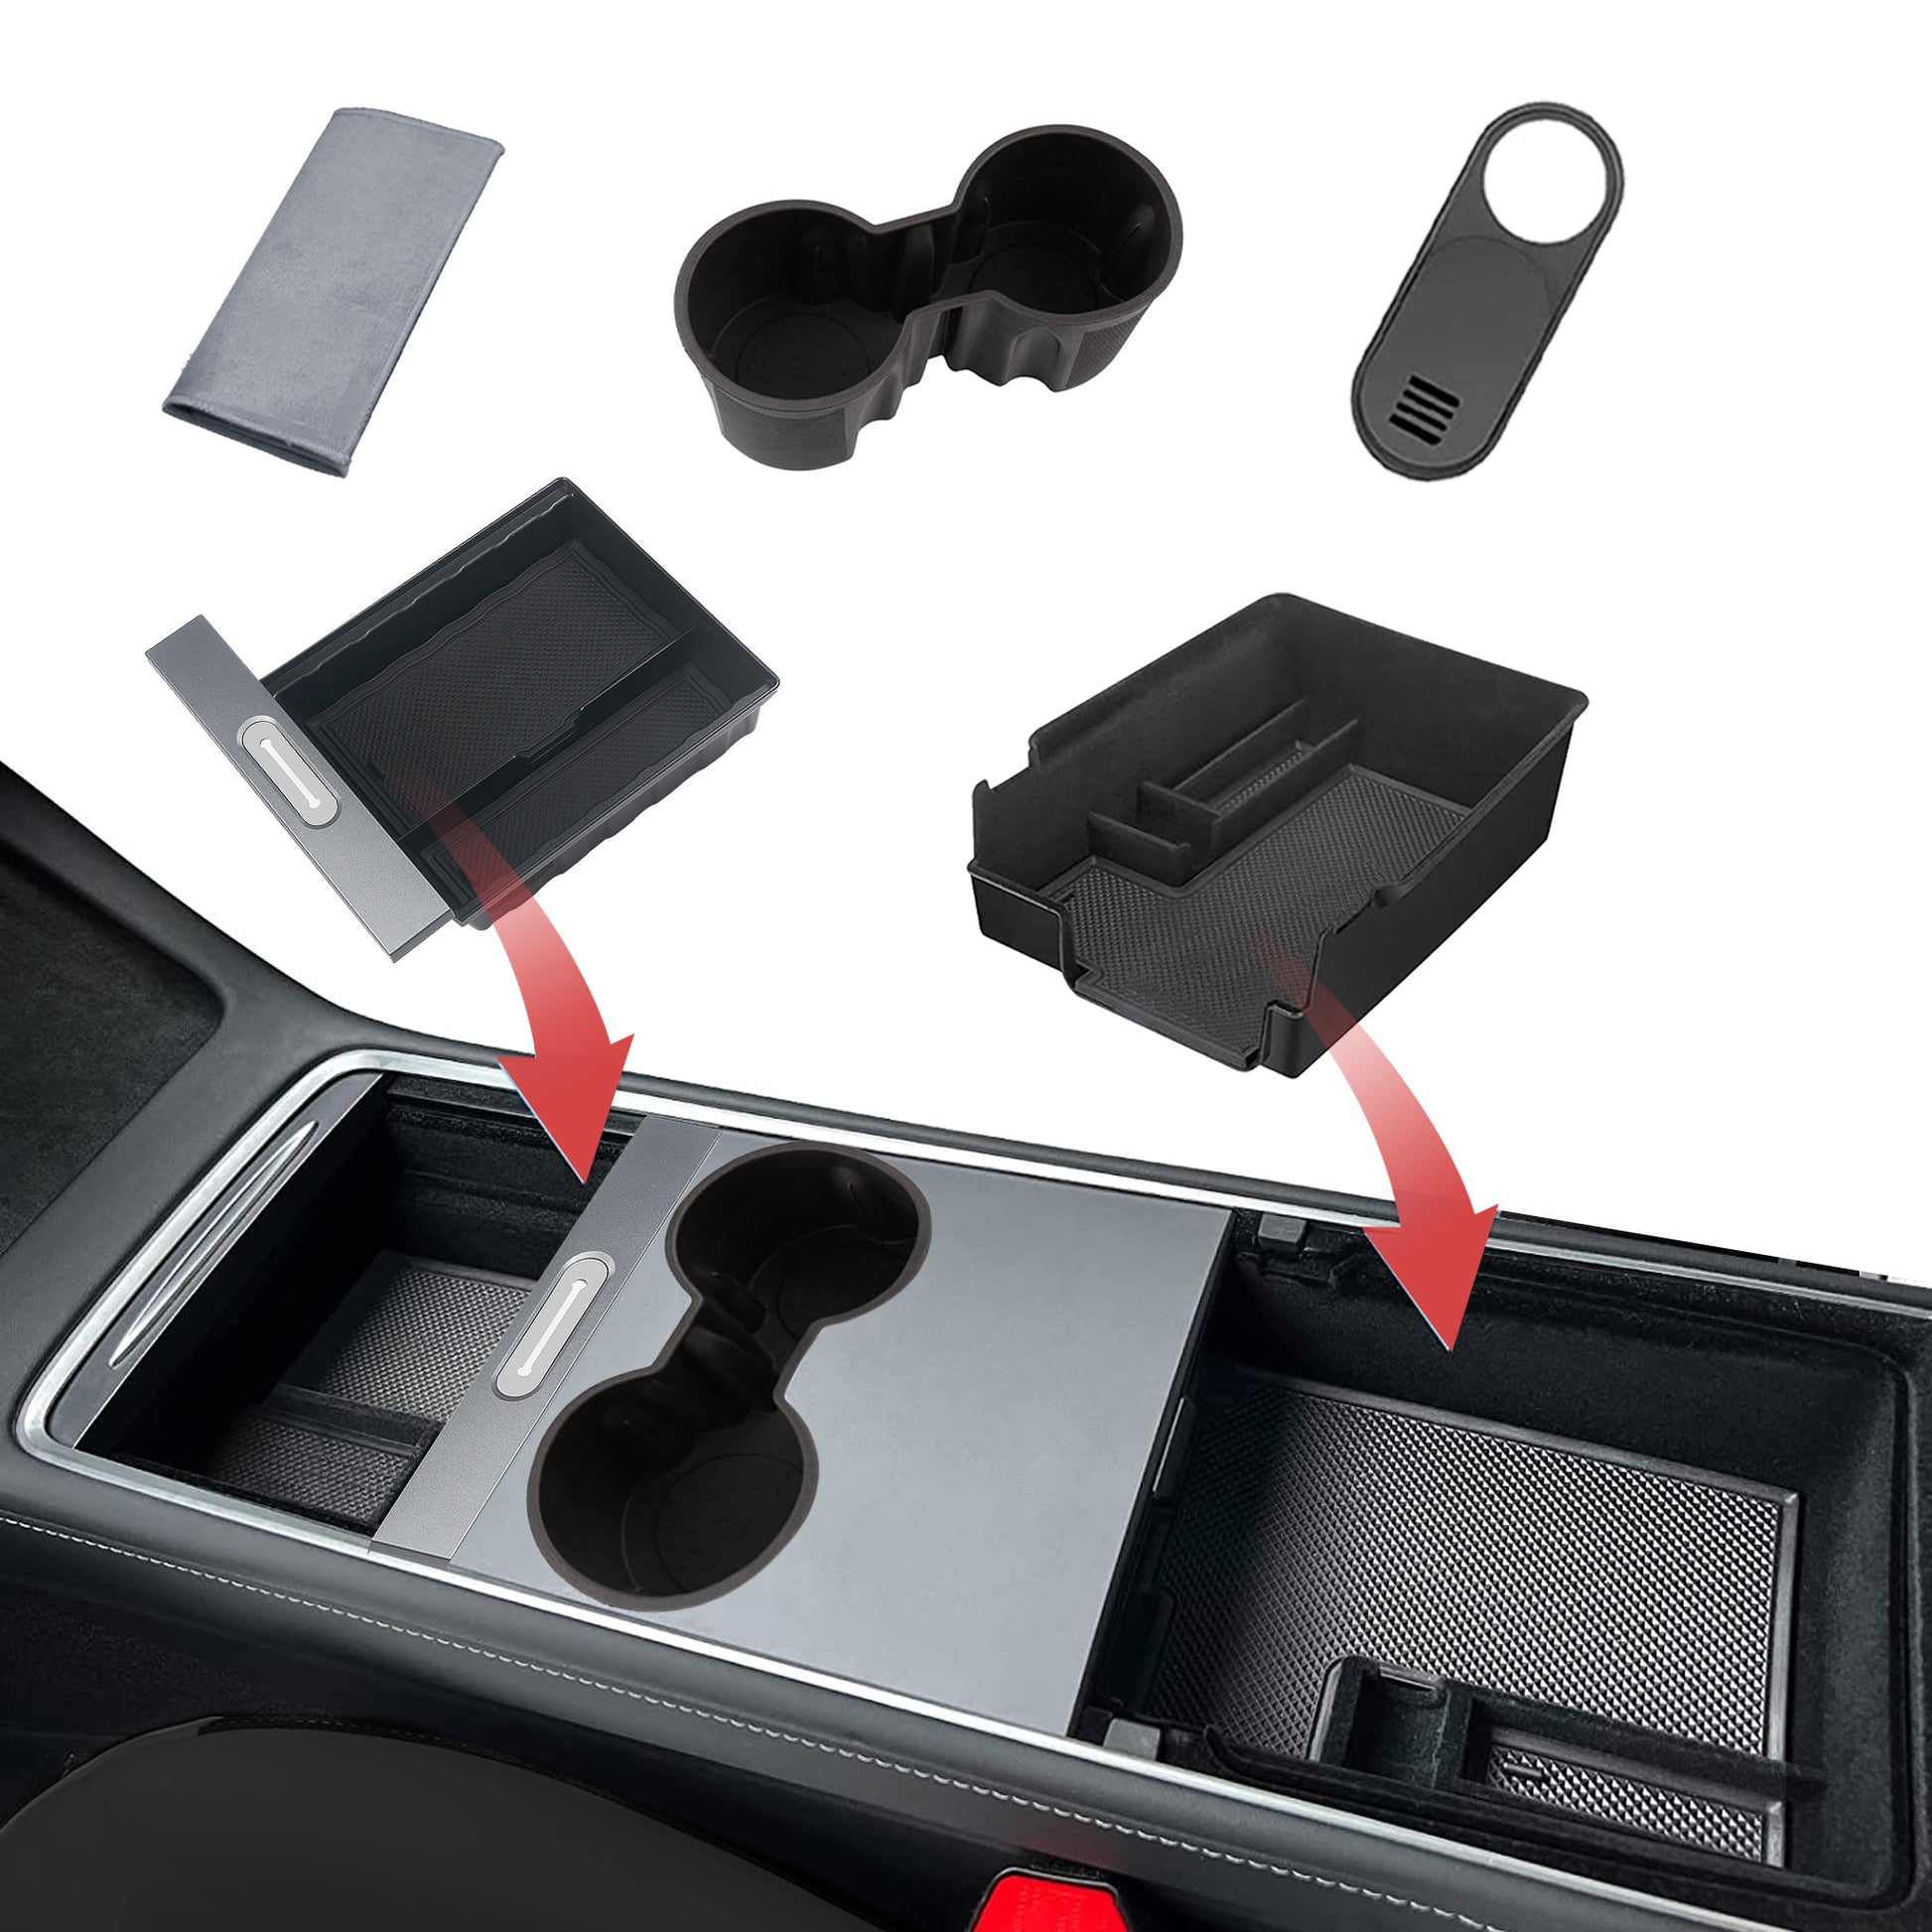 center console organizer 3 5 6 pieces pcs space store save flocked flocking tesla model 3 Y car 2022 2023 2021 arcoche accessories accessory aftermarket price Vehicles standard long range performance sr+ electric car rwd ev interior exterior diy decoration price elon musk must have black white red blue 5 7 seats seat